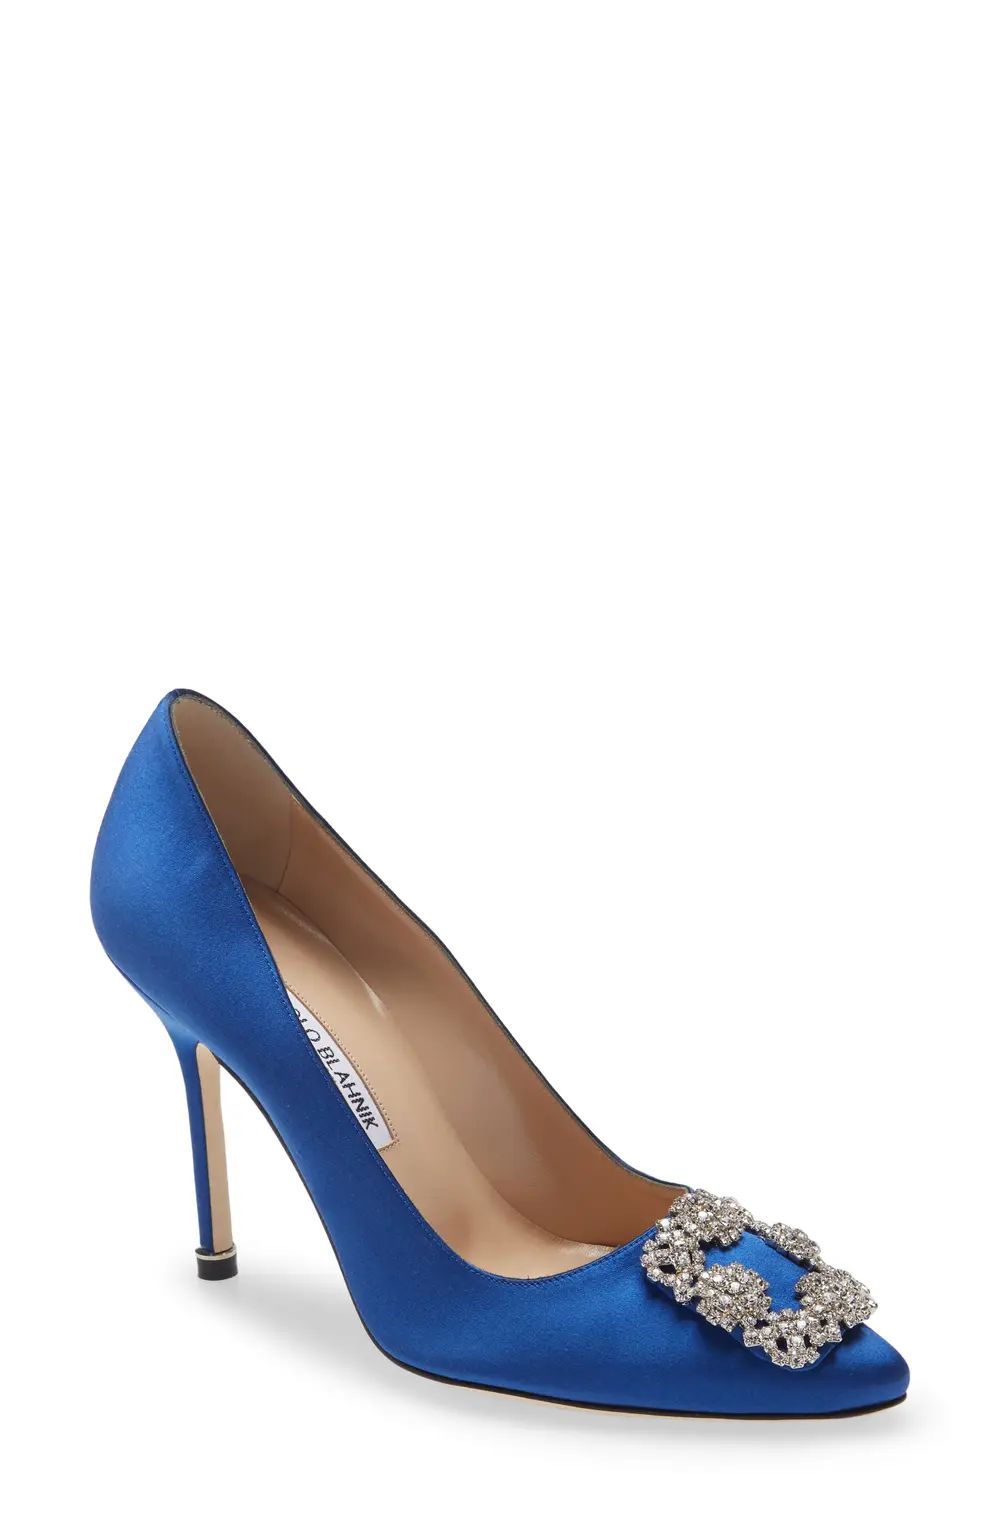 Manolo Blahnik Hangisi Crystal Buckle Pump, Size 6Us / 36Eu in Blue Satin Clear/Buckle at Nordstrom | Nordstrom Canada